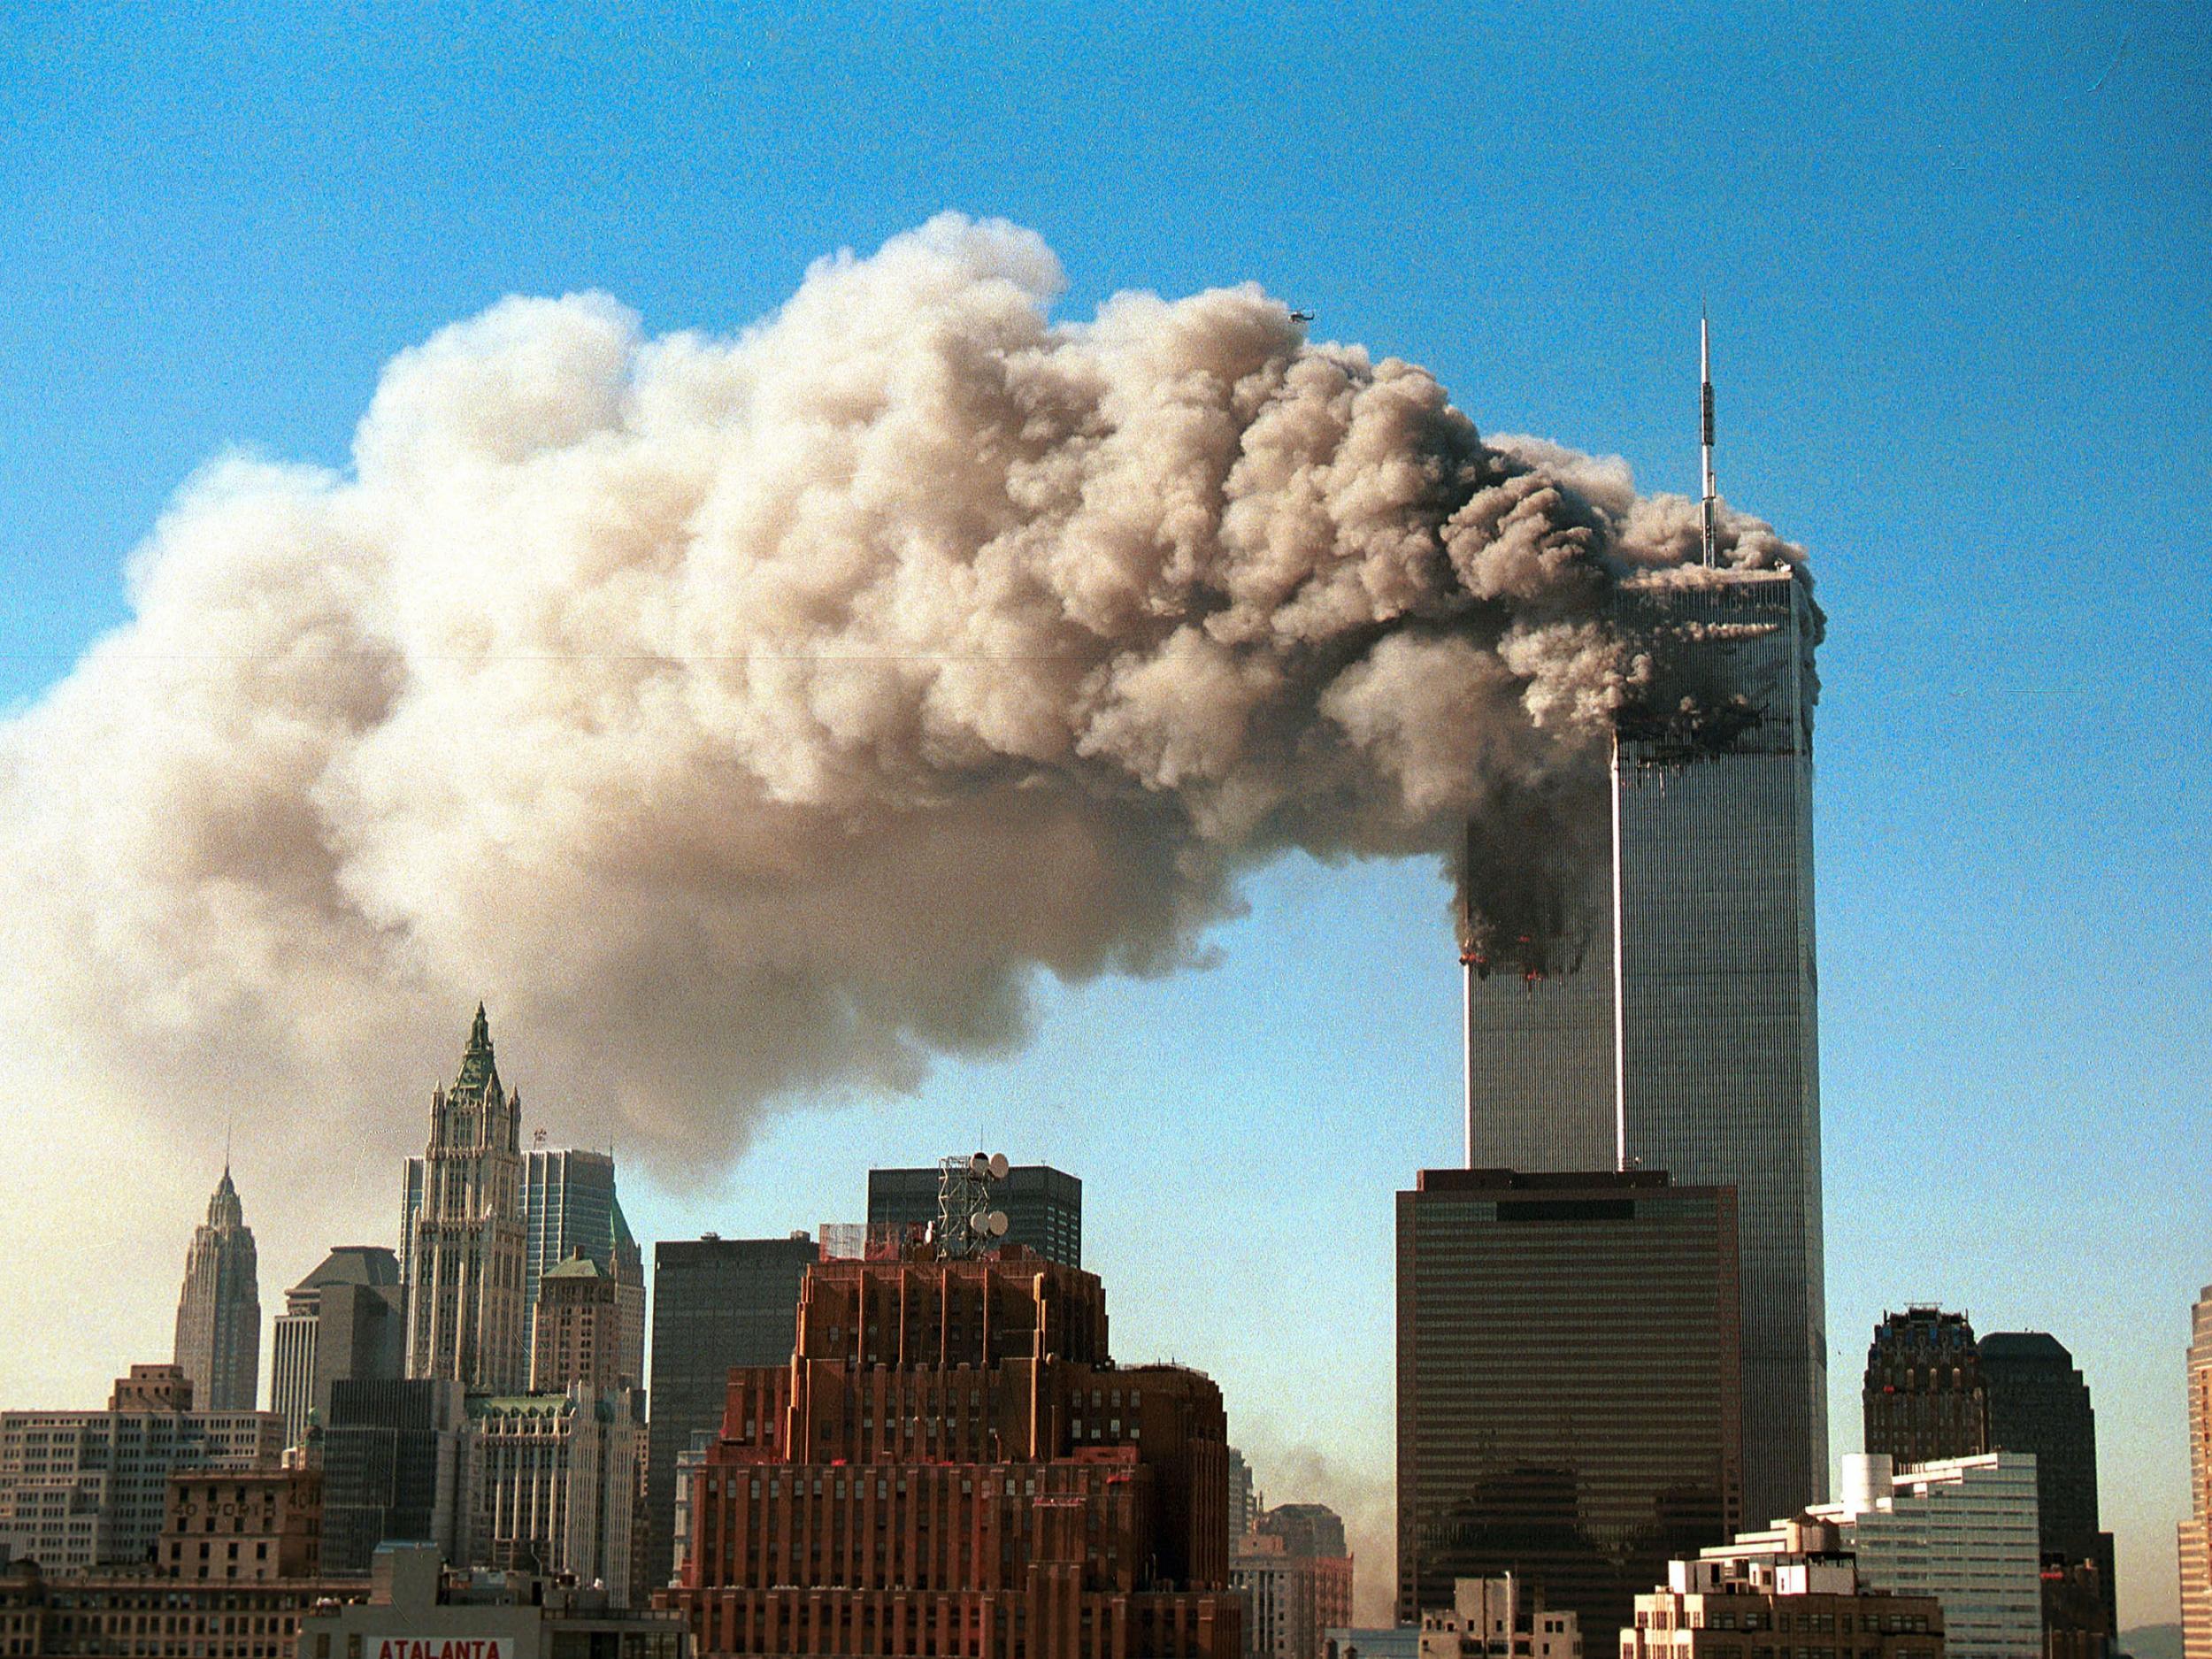 An example of a dread risk is the September 11 terror attacks in New York